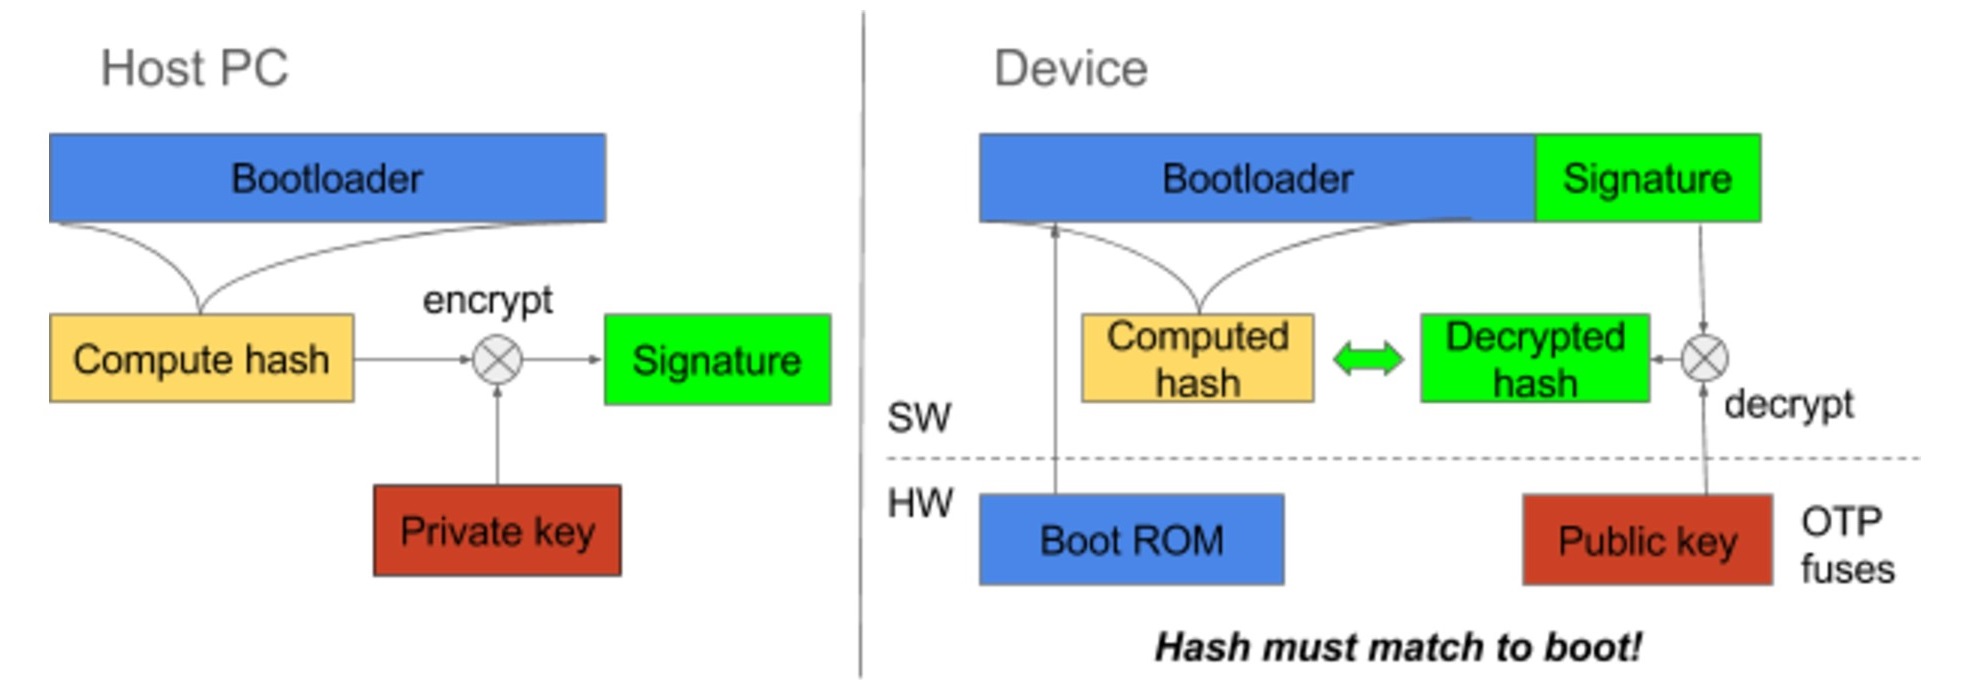 high level overview of bootloader authentication